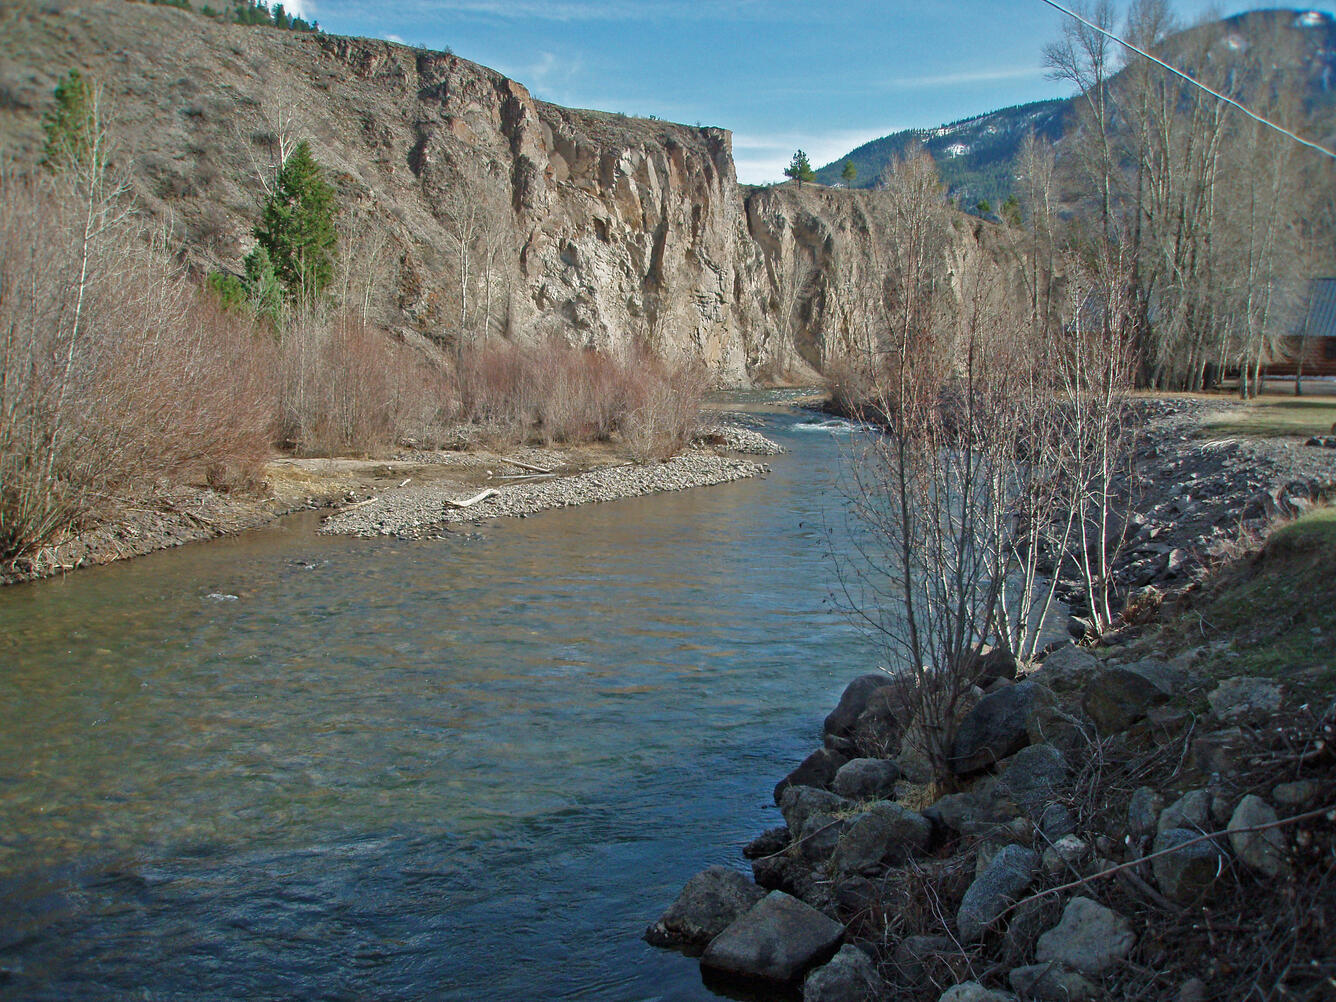 Lake Fork of the Gunnison near Lake City, CO. XS1, looking upstream, from left hand bank, April 10, 2012. Discharge: 175 cfs